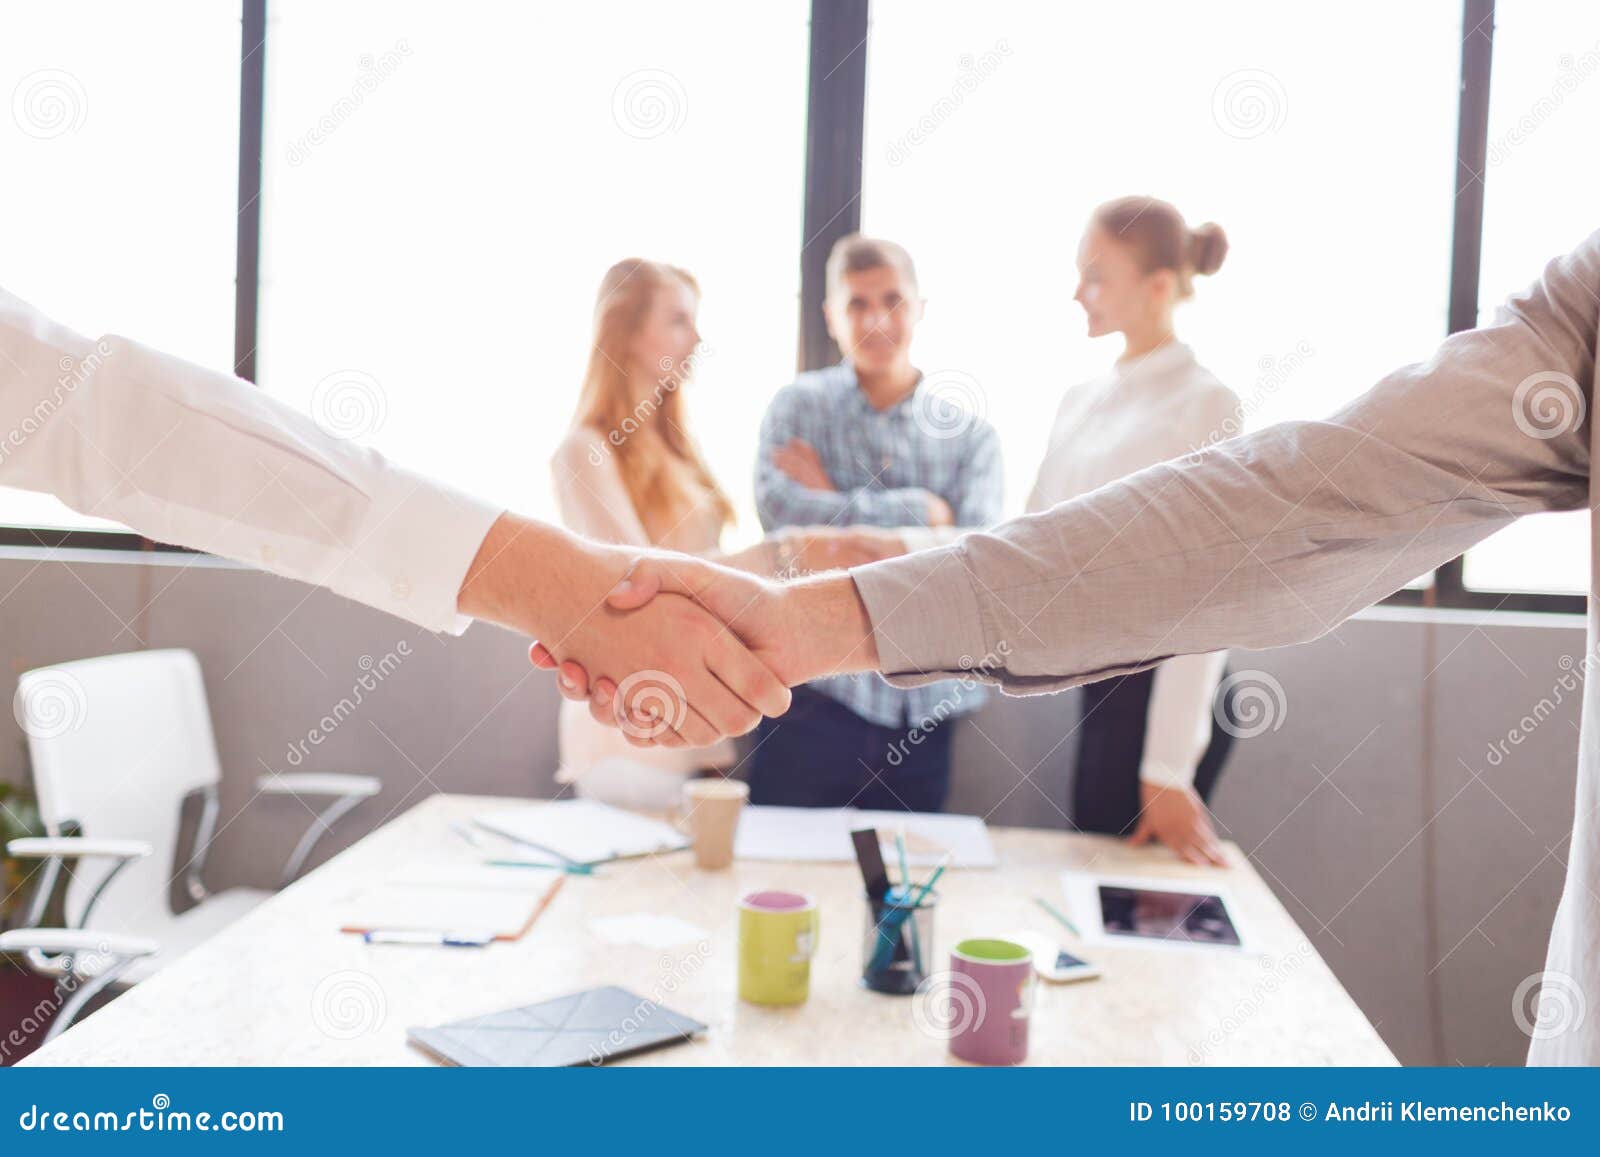 Business handshake and business people.Vintage tone Retro filter effect,soft focus,low light. Two confident business man shaking hands during a meeting in the office, success, dealing, greeting and partner concept.